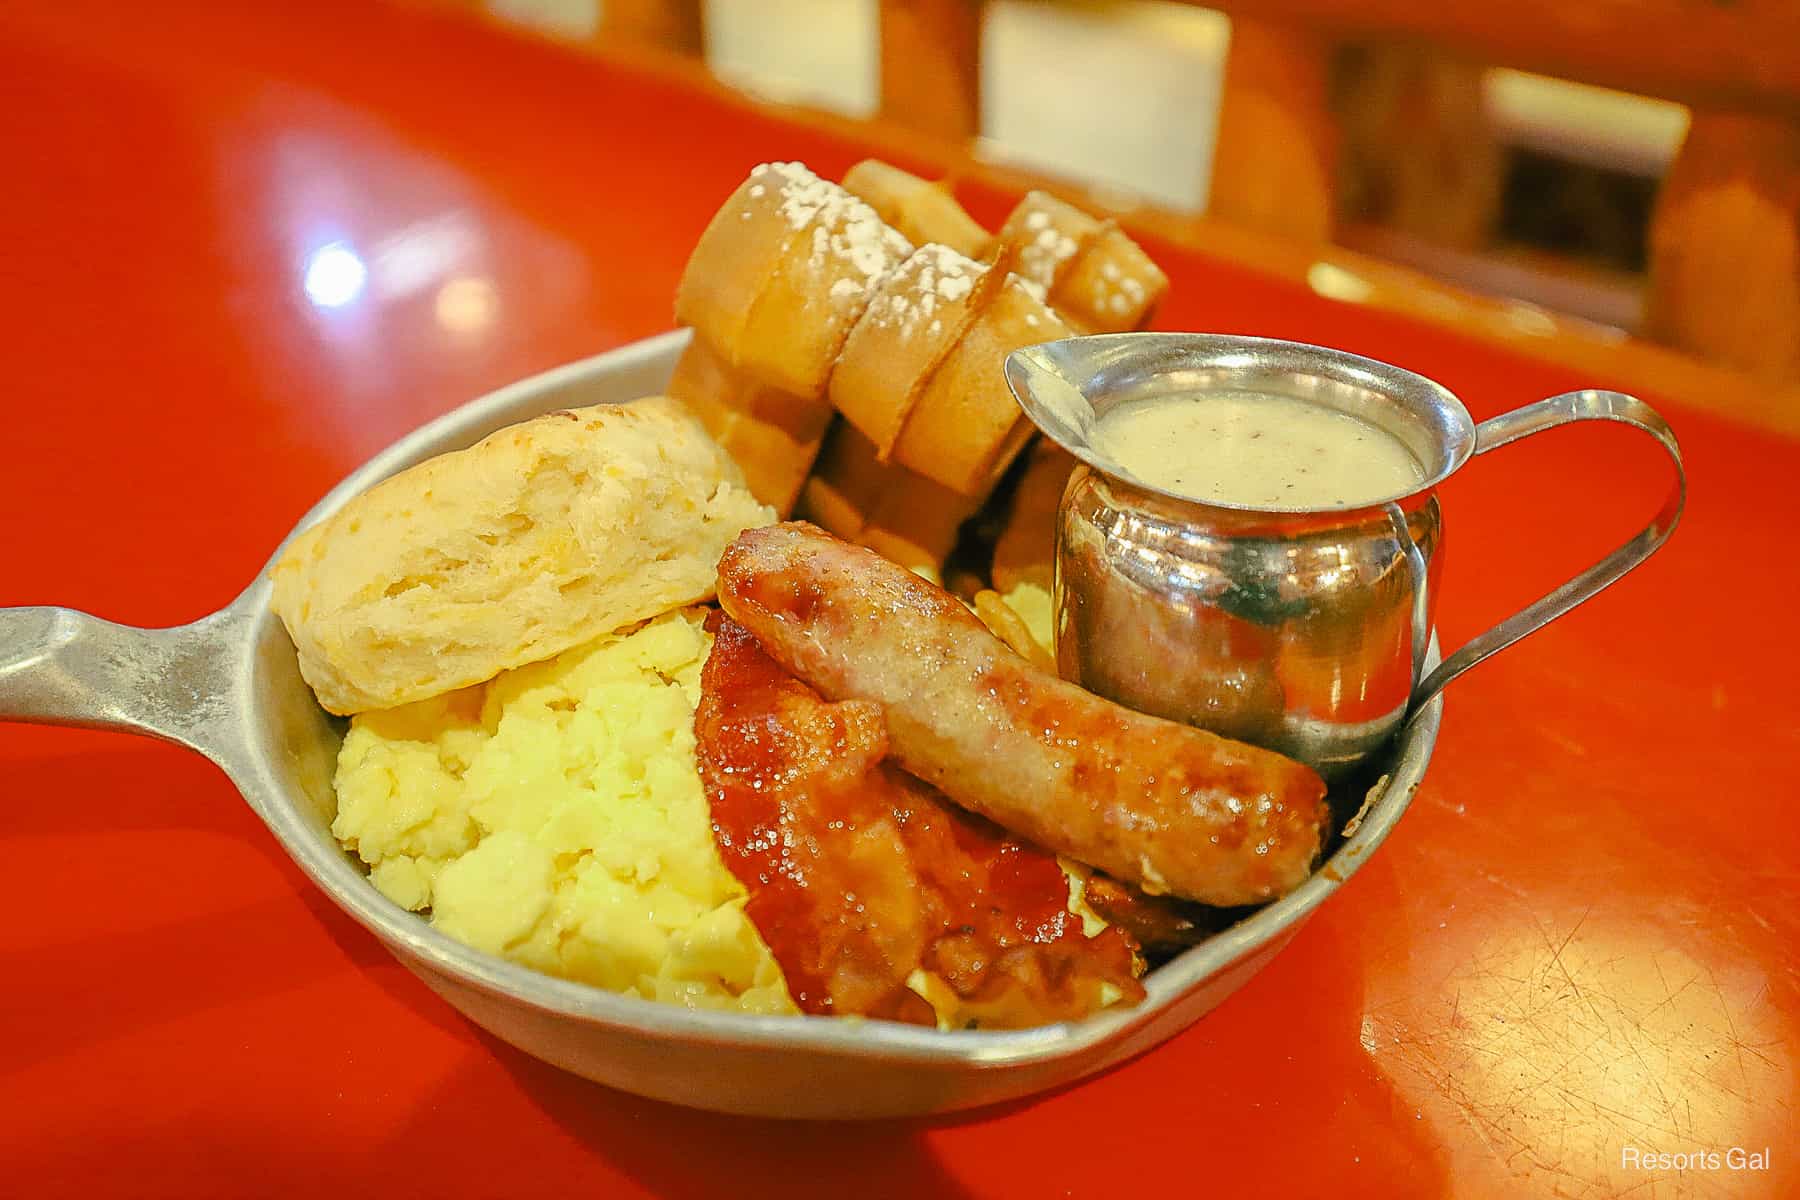 a breakfast skillet from Whispering Canyon 